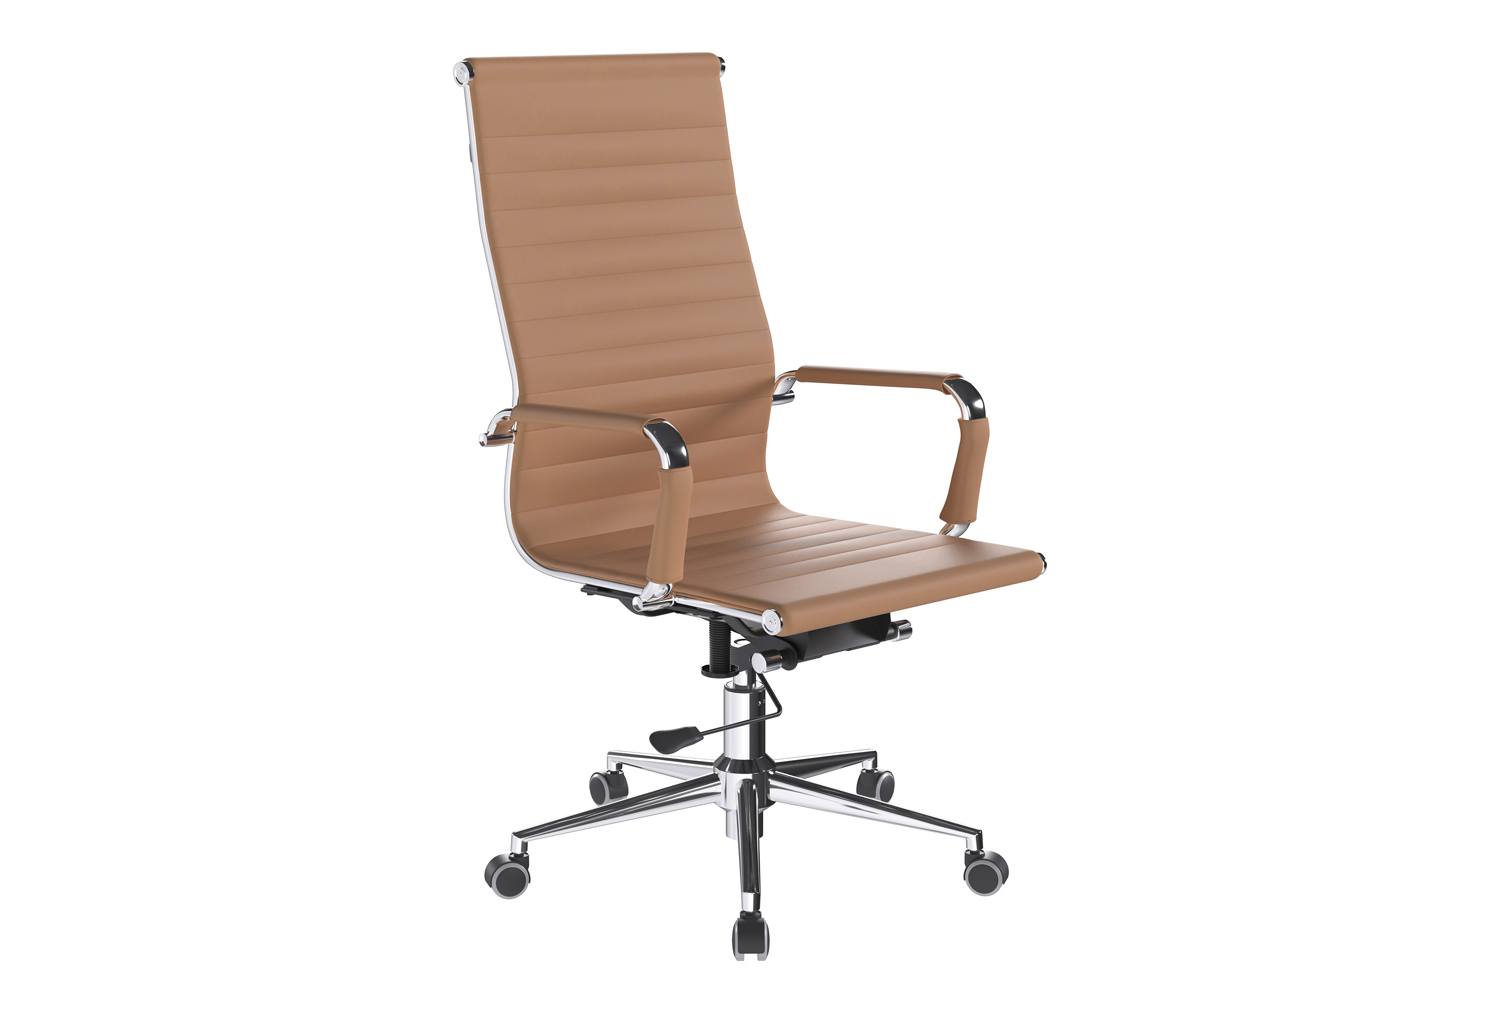 Andruzzi High Back Black Bonded Leather Executive Office Chair, Brown,Fully Installed